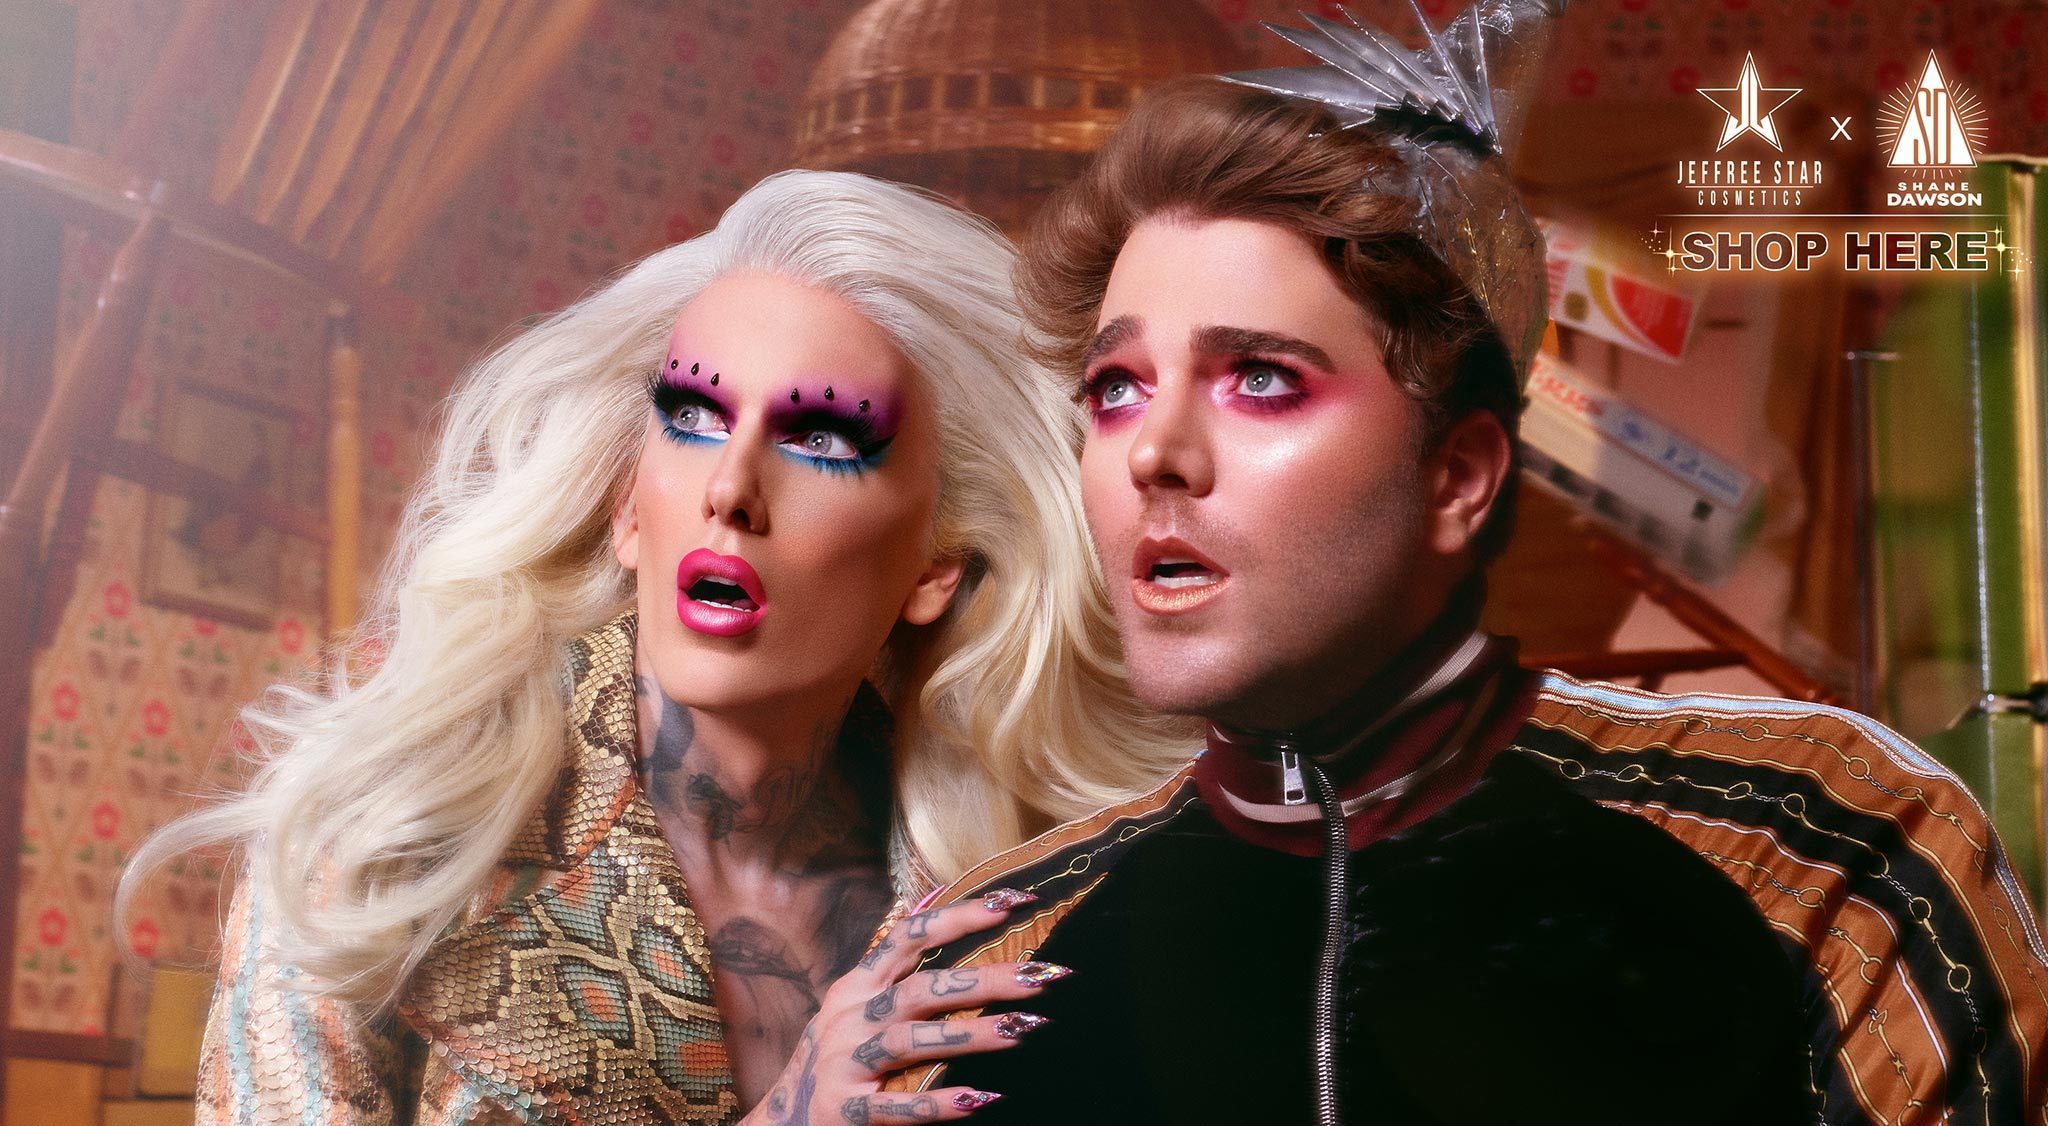 Shane Dawson and Jeffree Star create a hit  series and